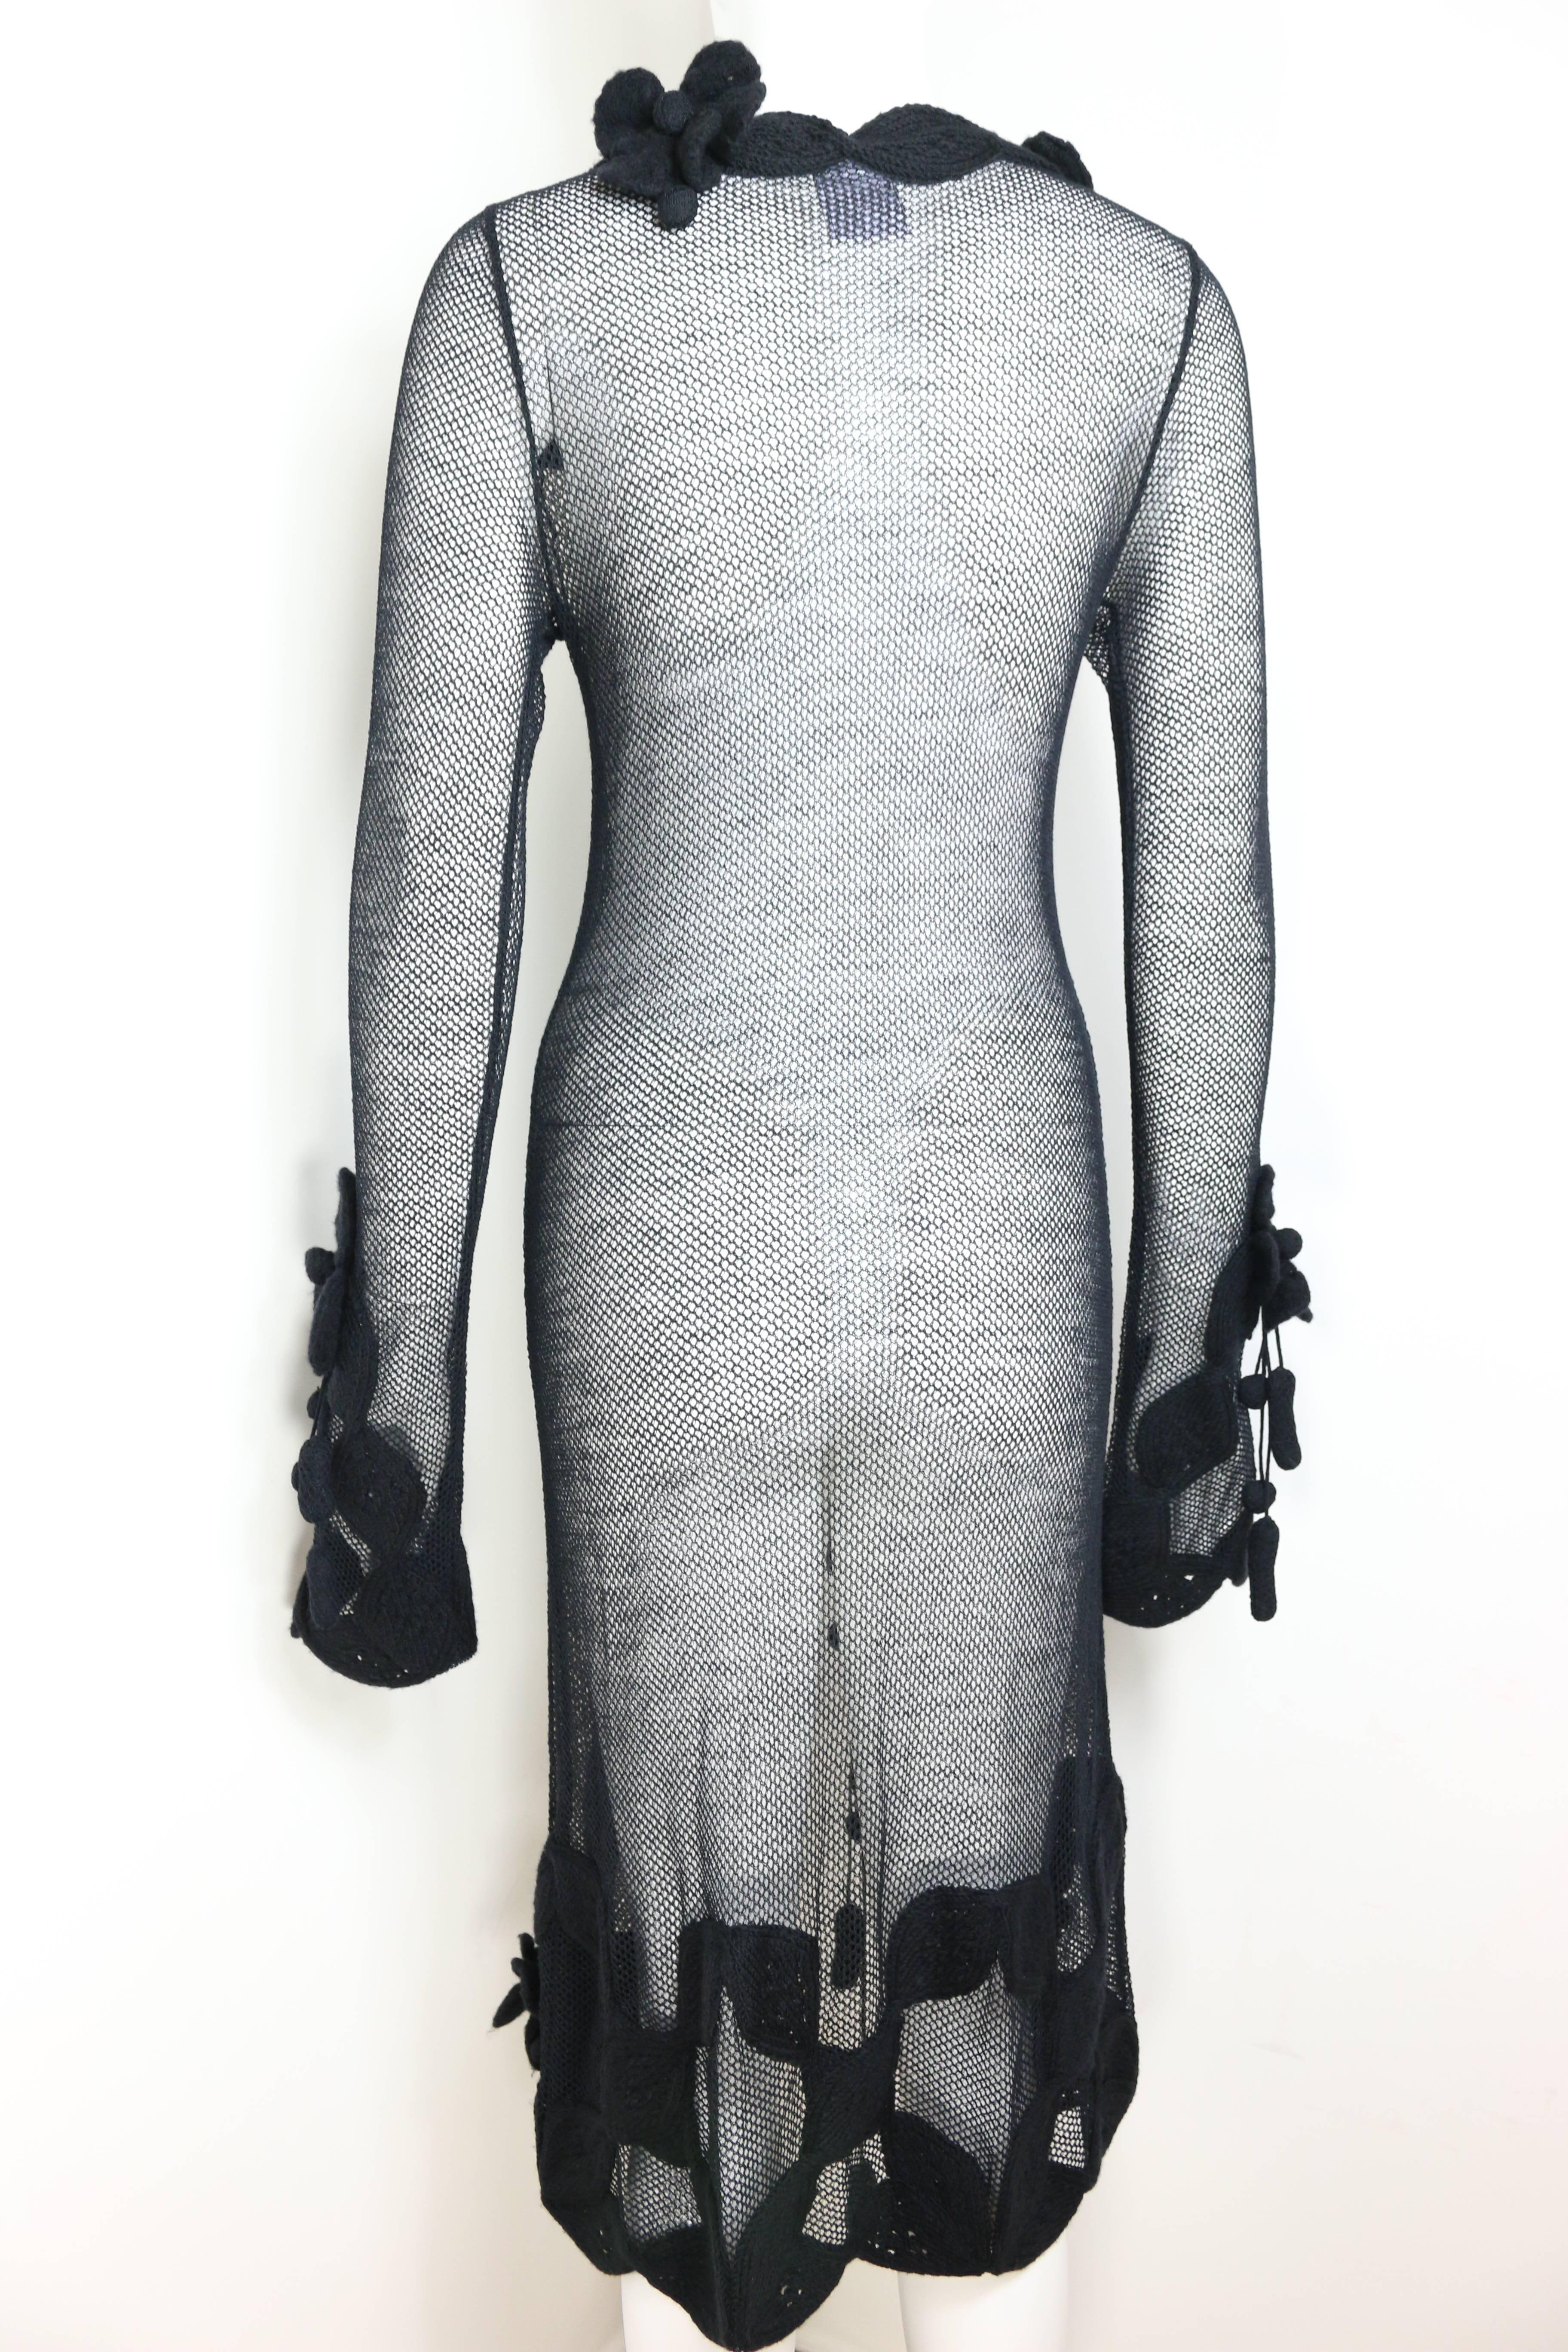 Women's Fall 2007 Chanel Black Wool See Through Knitted Dress